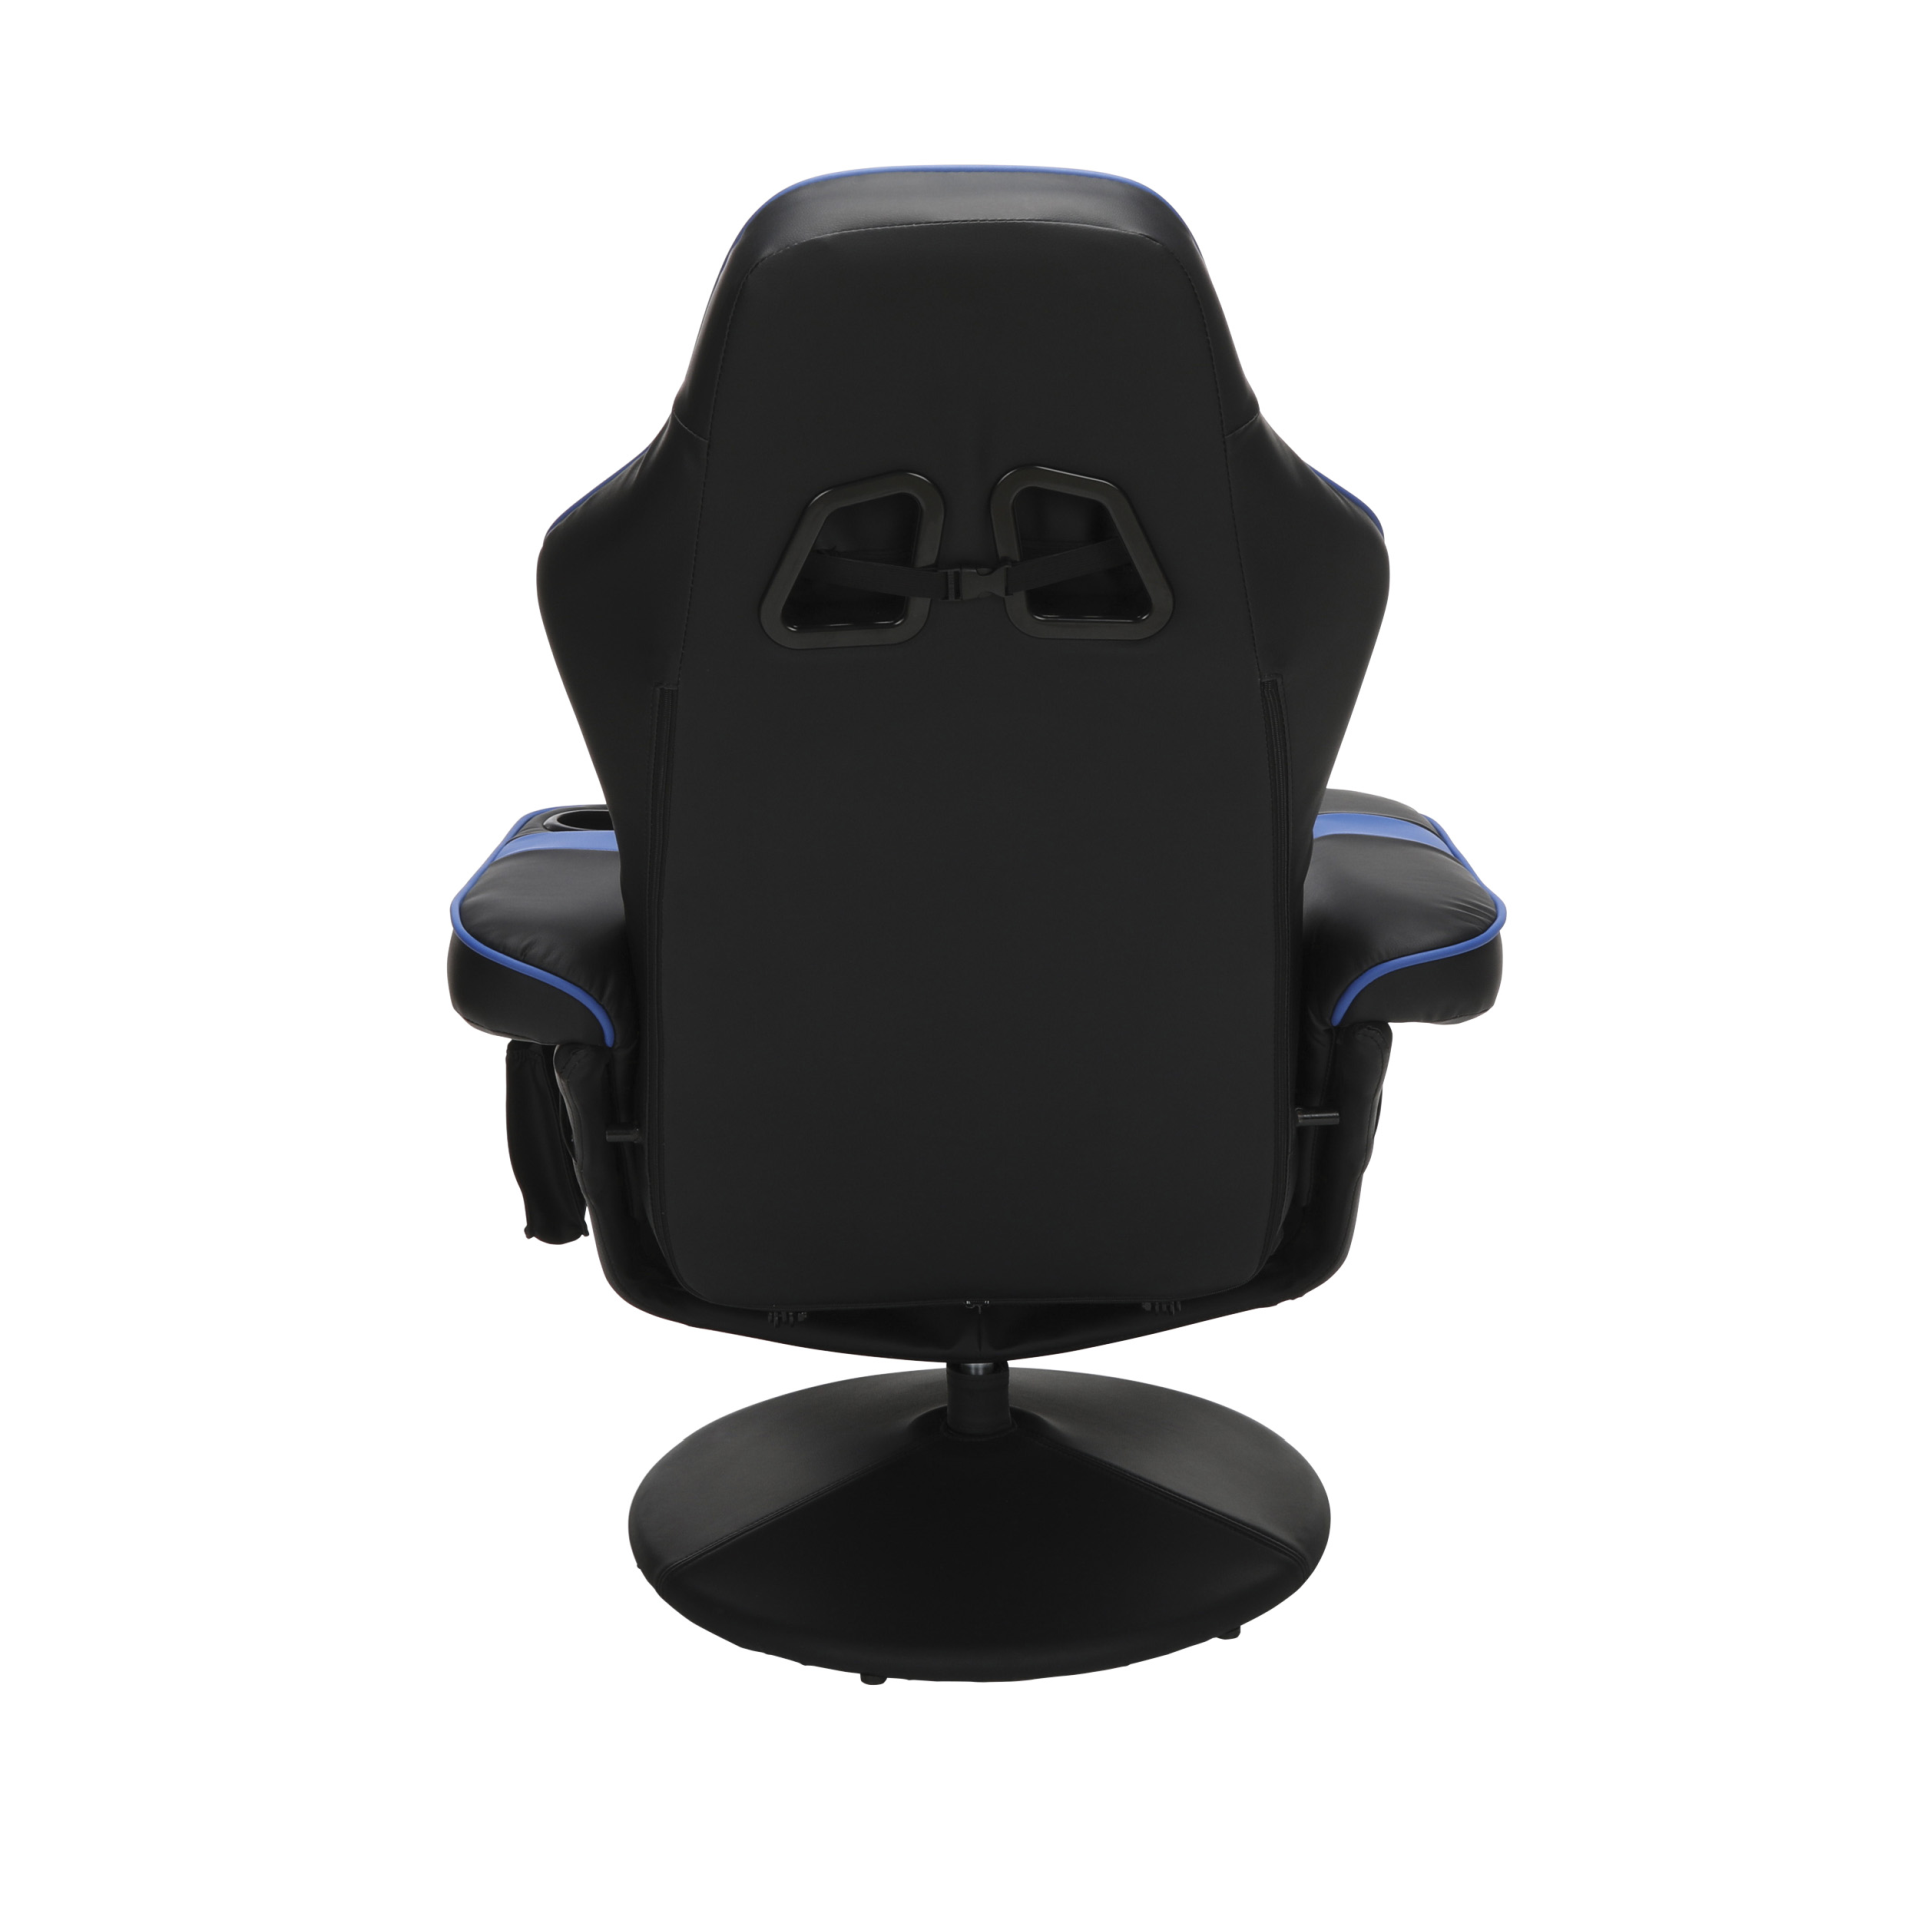 RESPAWN RSP-900 Gaming Recliner #12